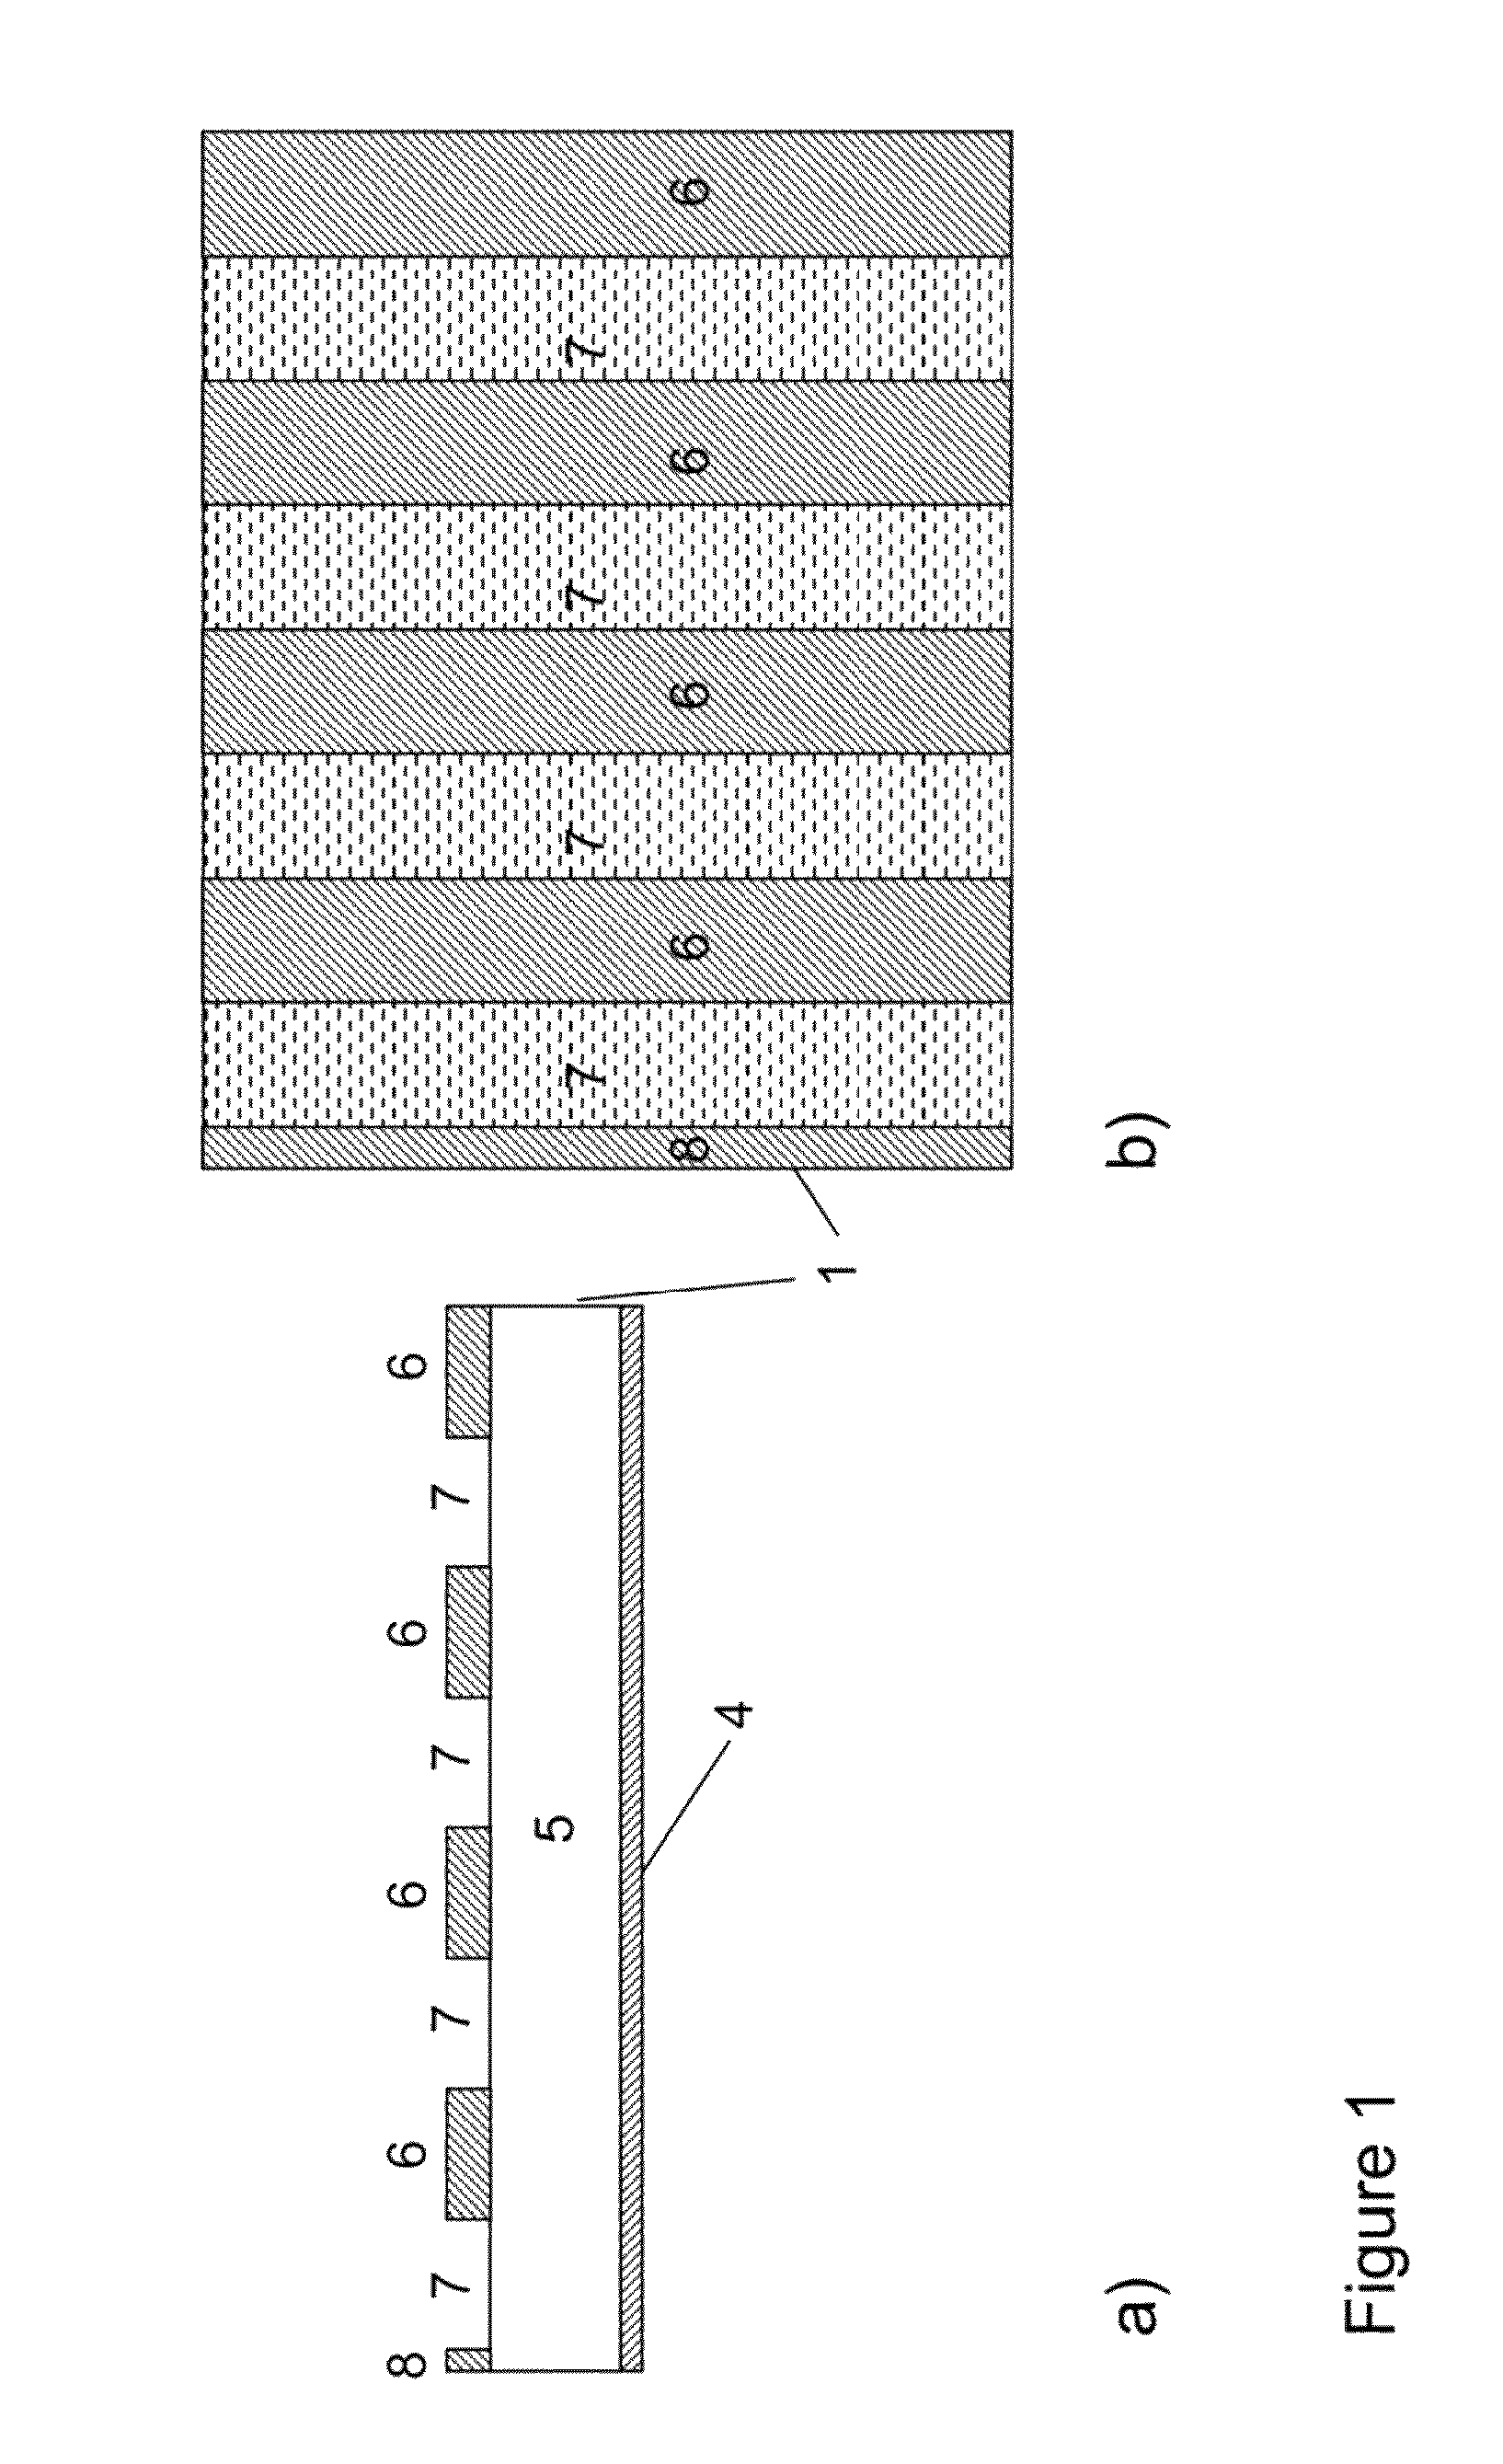 Cell and module processing of semiconductor wafers for back-contacted solar photovoltaic module